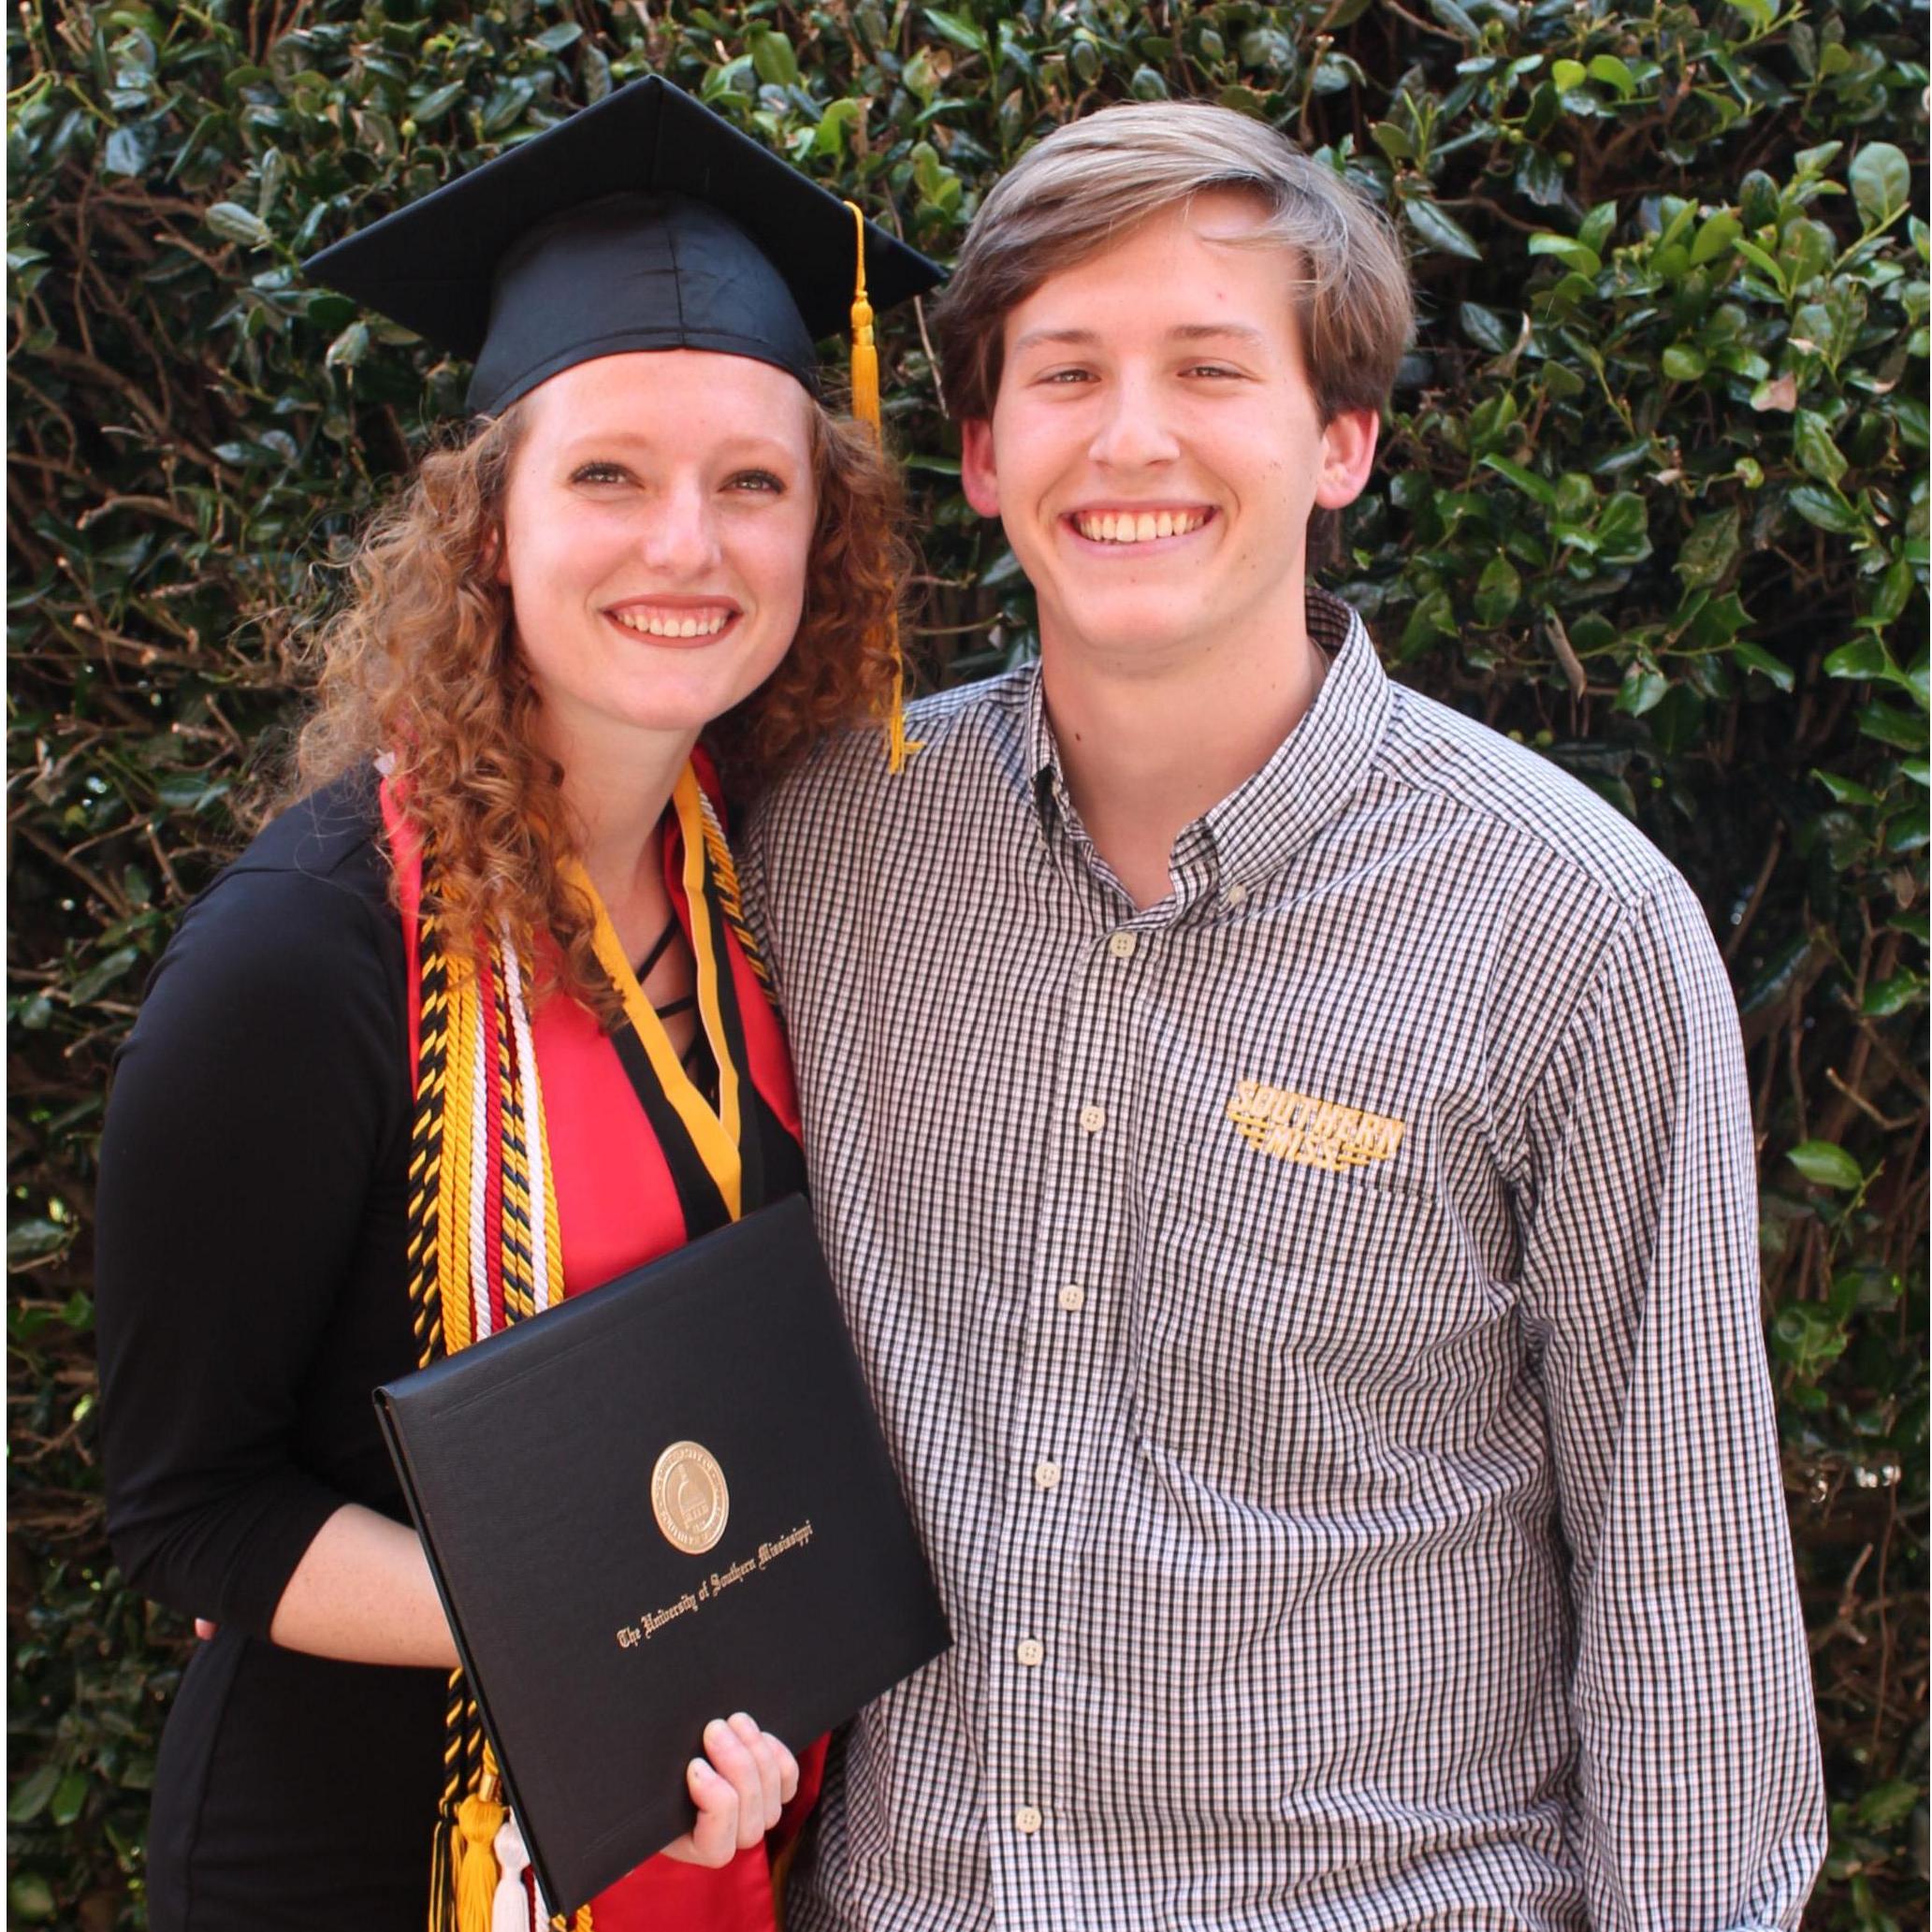 After Caroline's graduation from Southern Miss